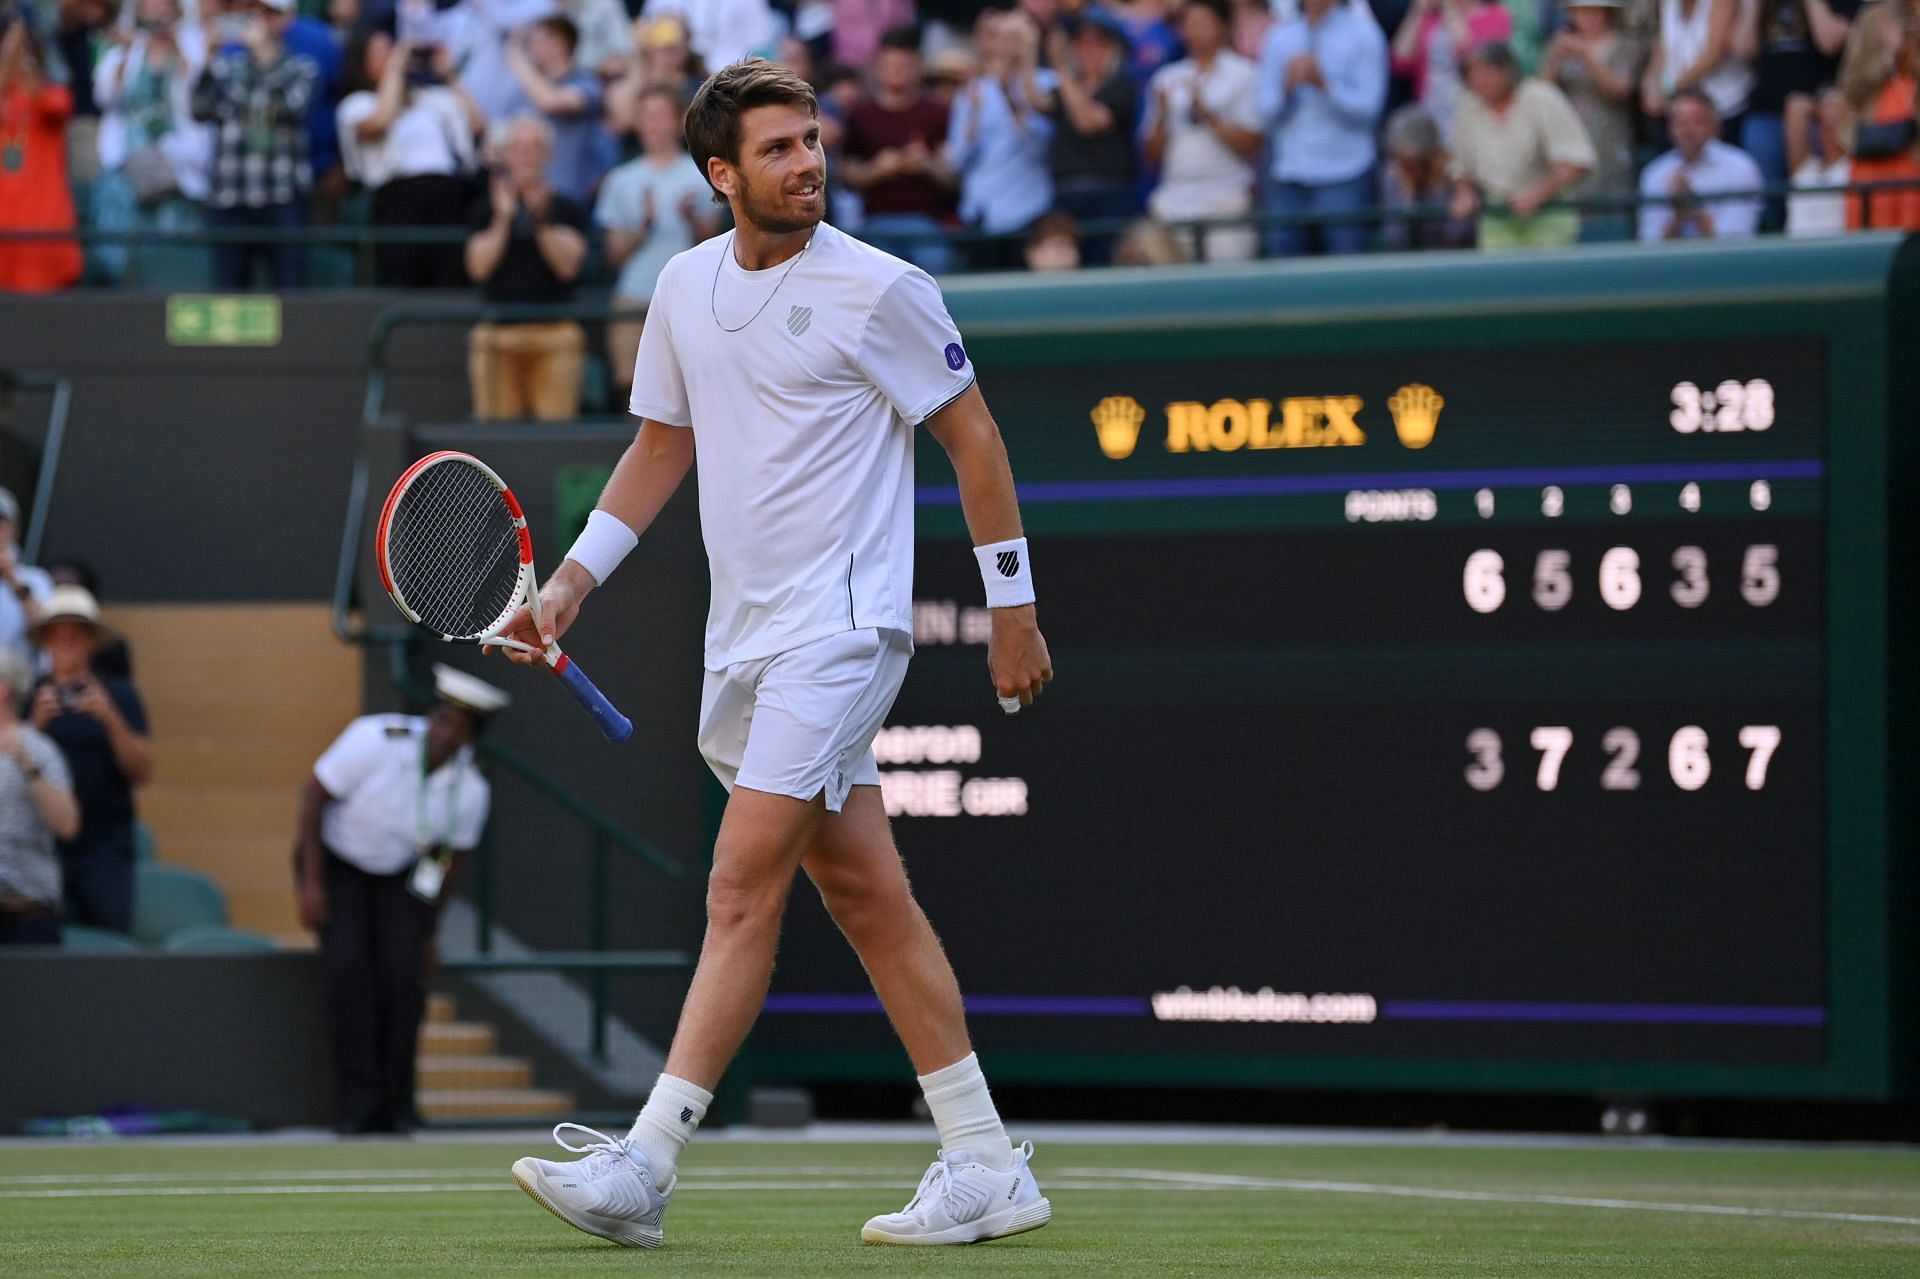 Wimbledon 2022 results today, Winners, Scores and Recap Novak Djokovic produces sensational comeback, Cameron Norrie keeps British hopes alive Day 9